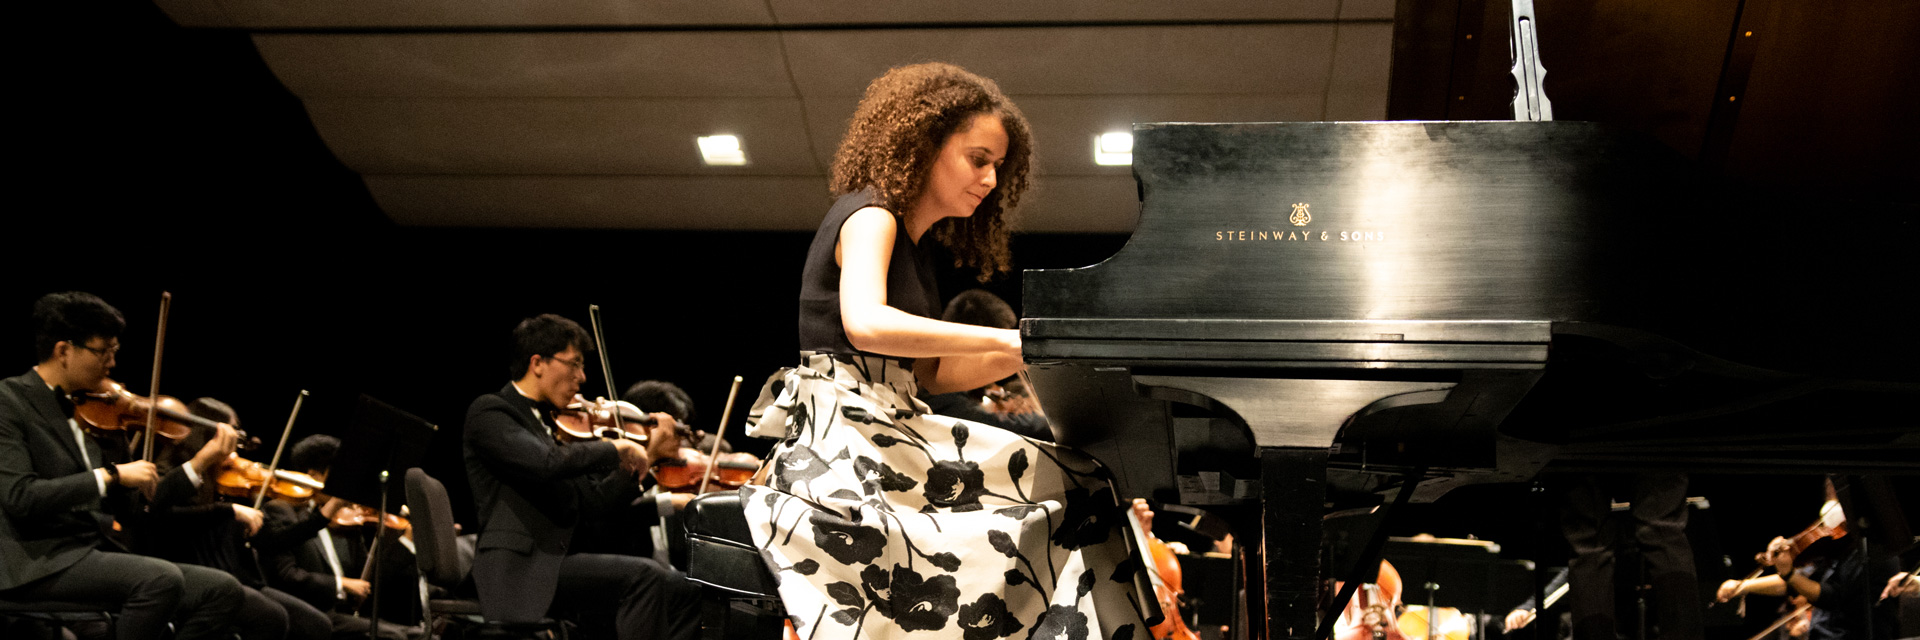 Laura Ballestrino playing grand piano in front of orchestra